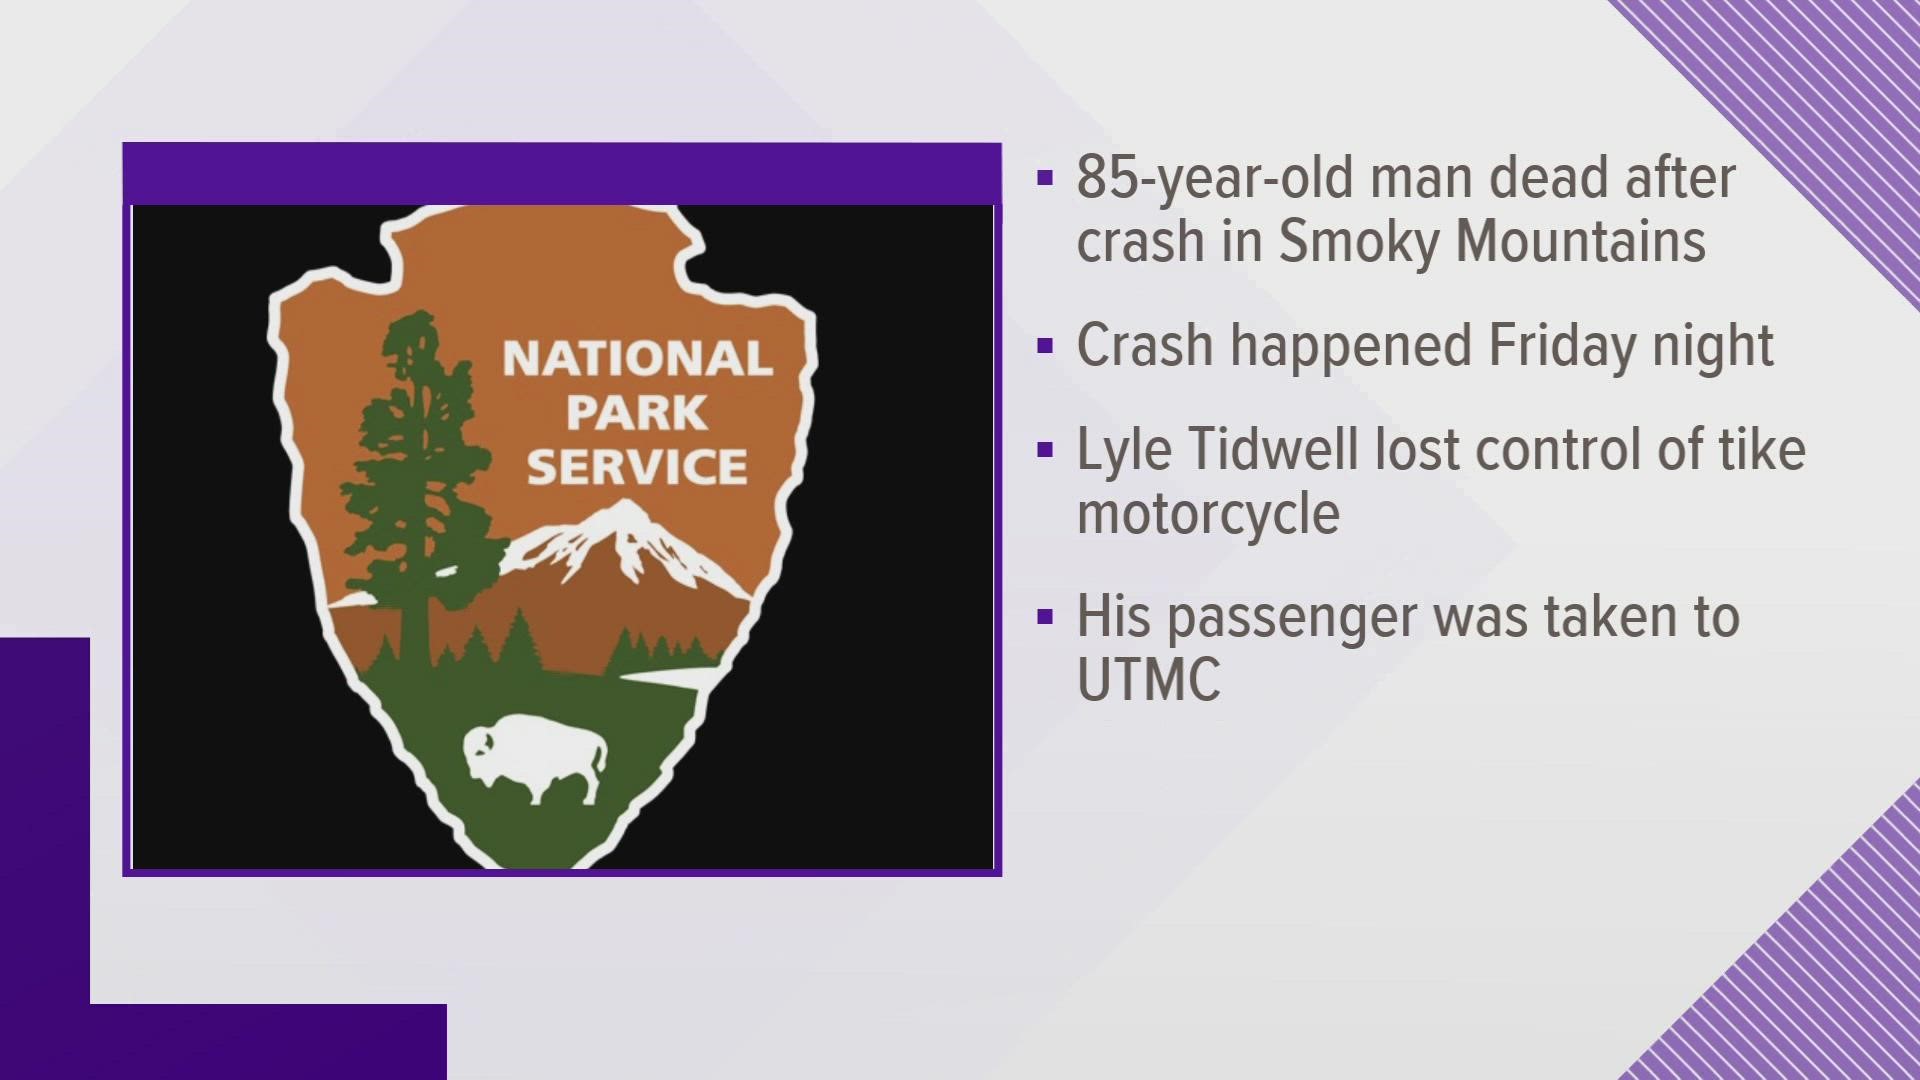 Rangers said Lyle Tidwell, 85, lost control of his trike motorcycle on Newfound Gap Road near Alum Cave Trail.